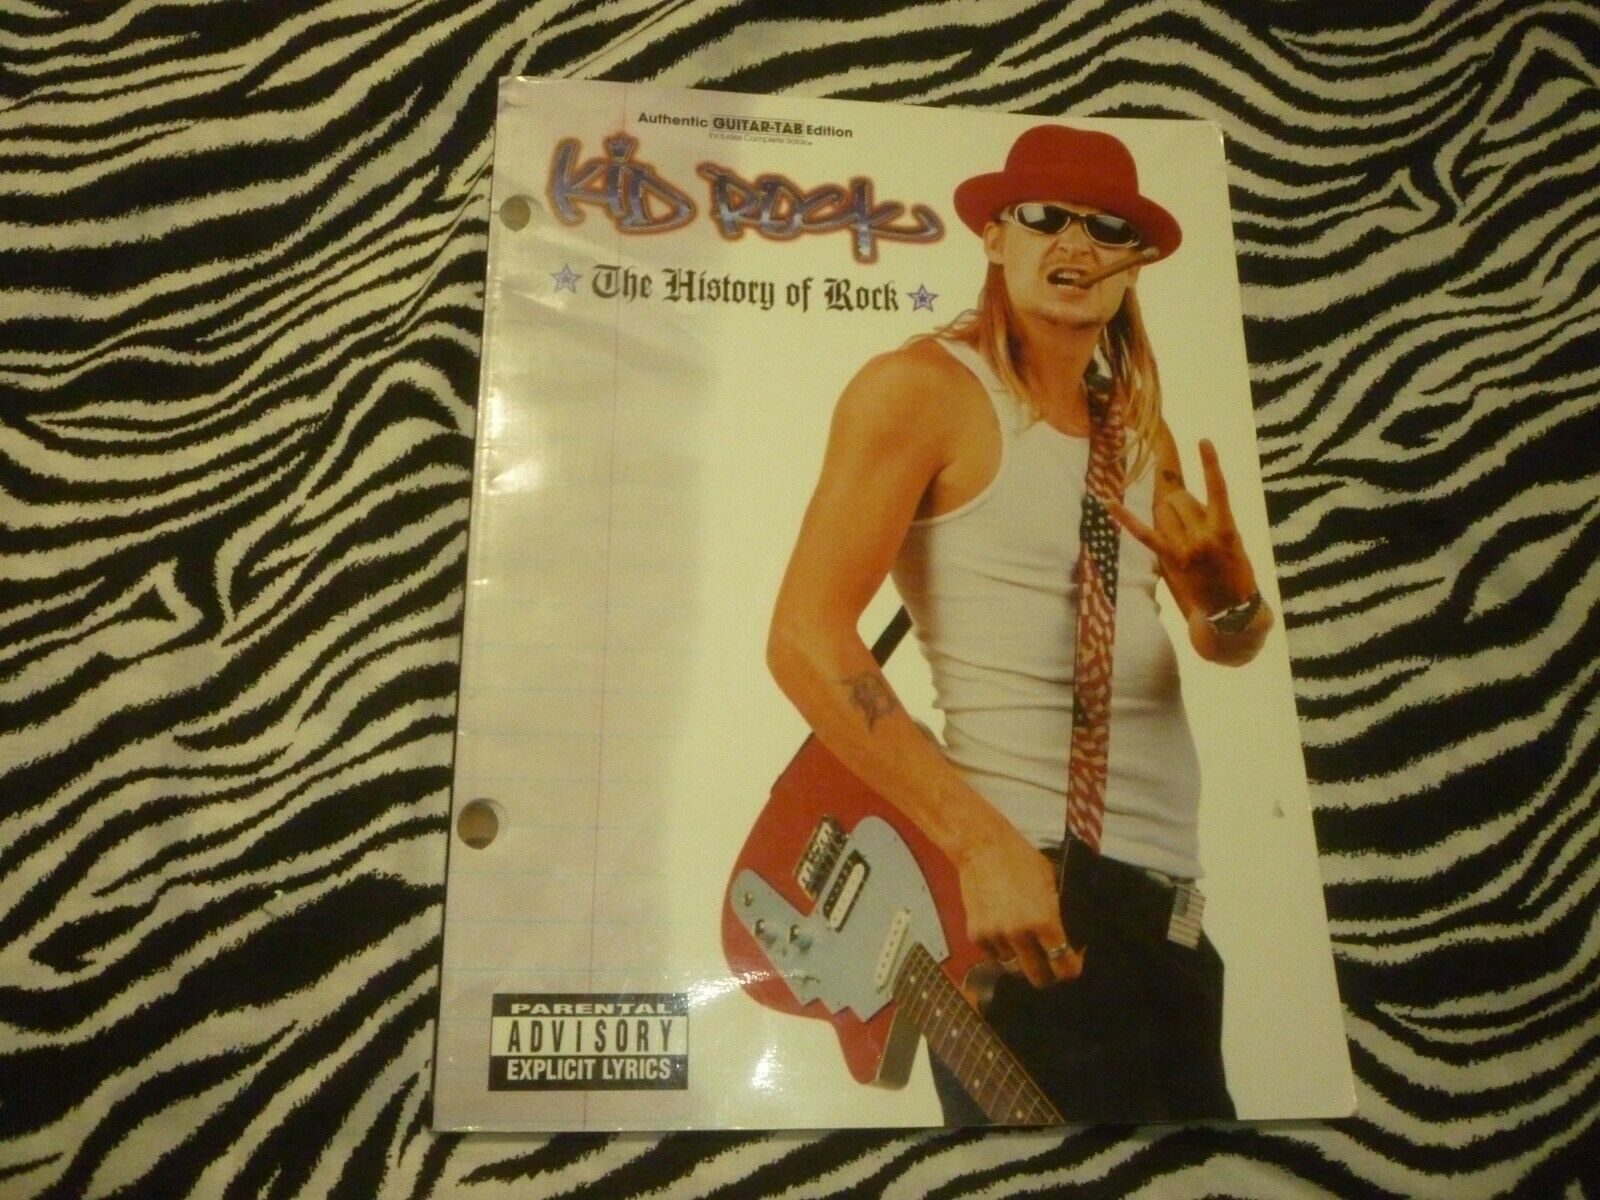 Kid Rock - The History Of Rock Sheet Music Book - Good Condition